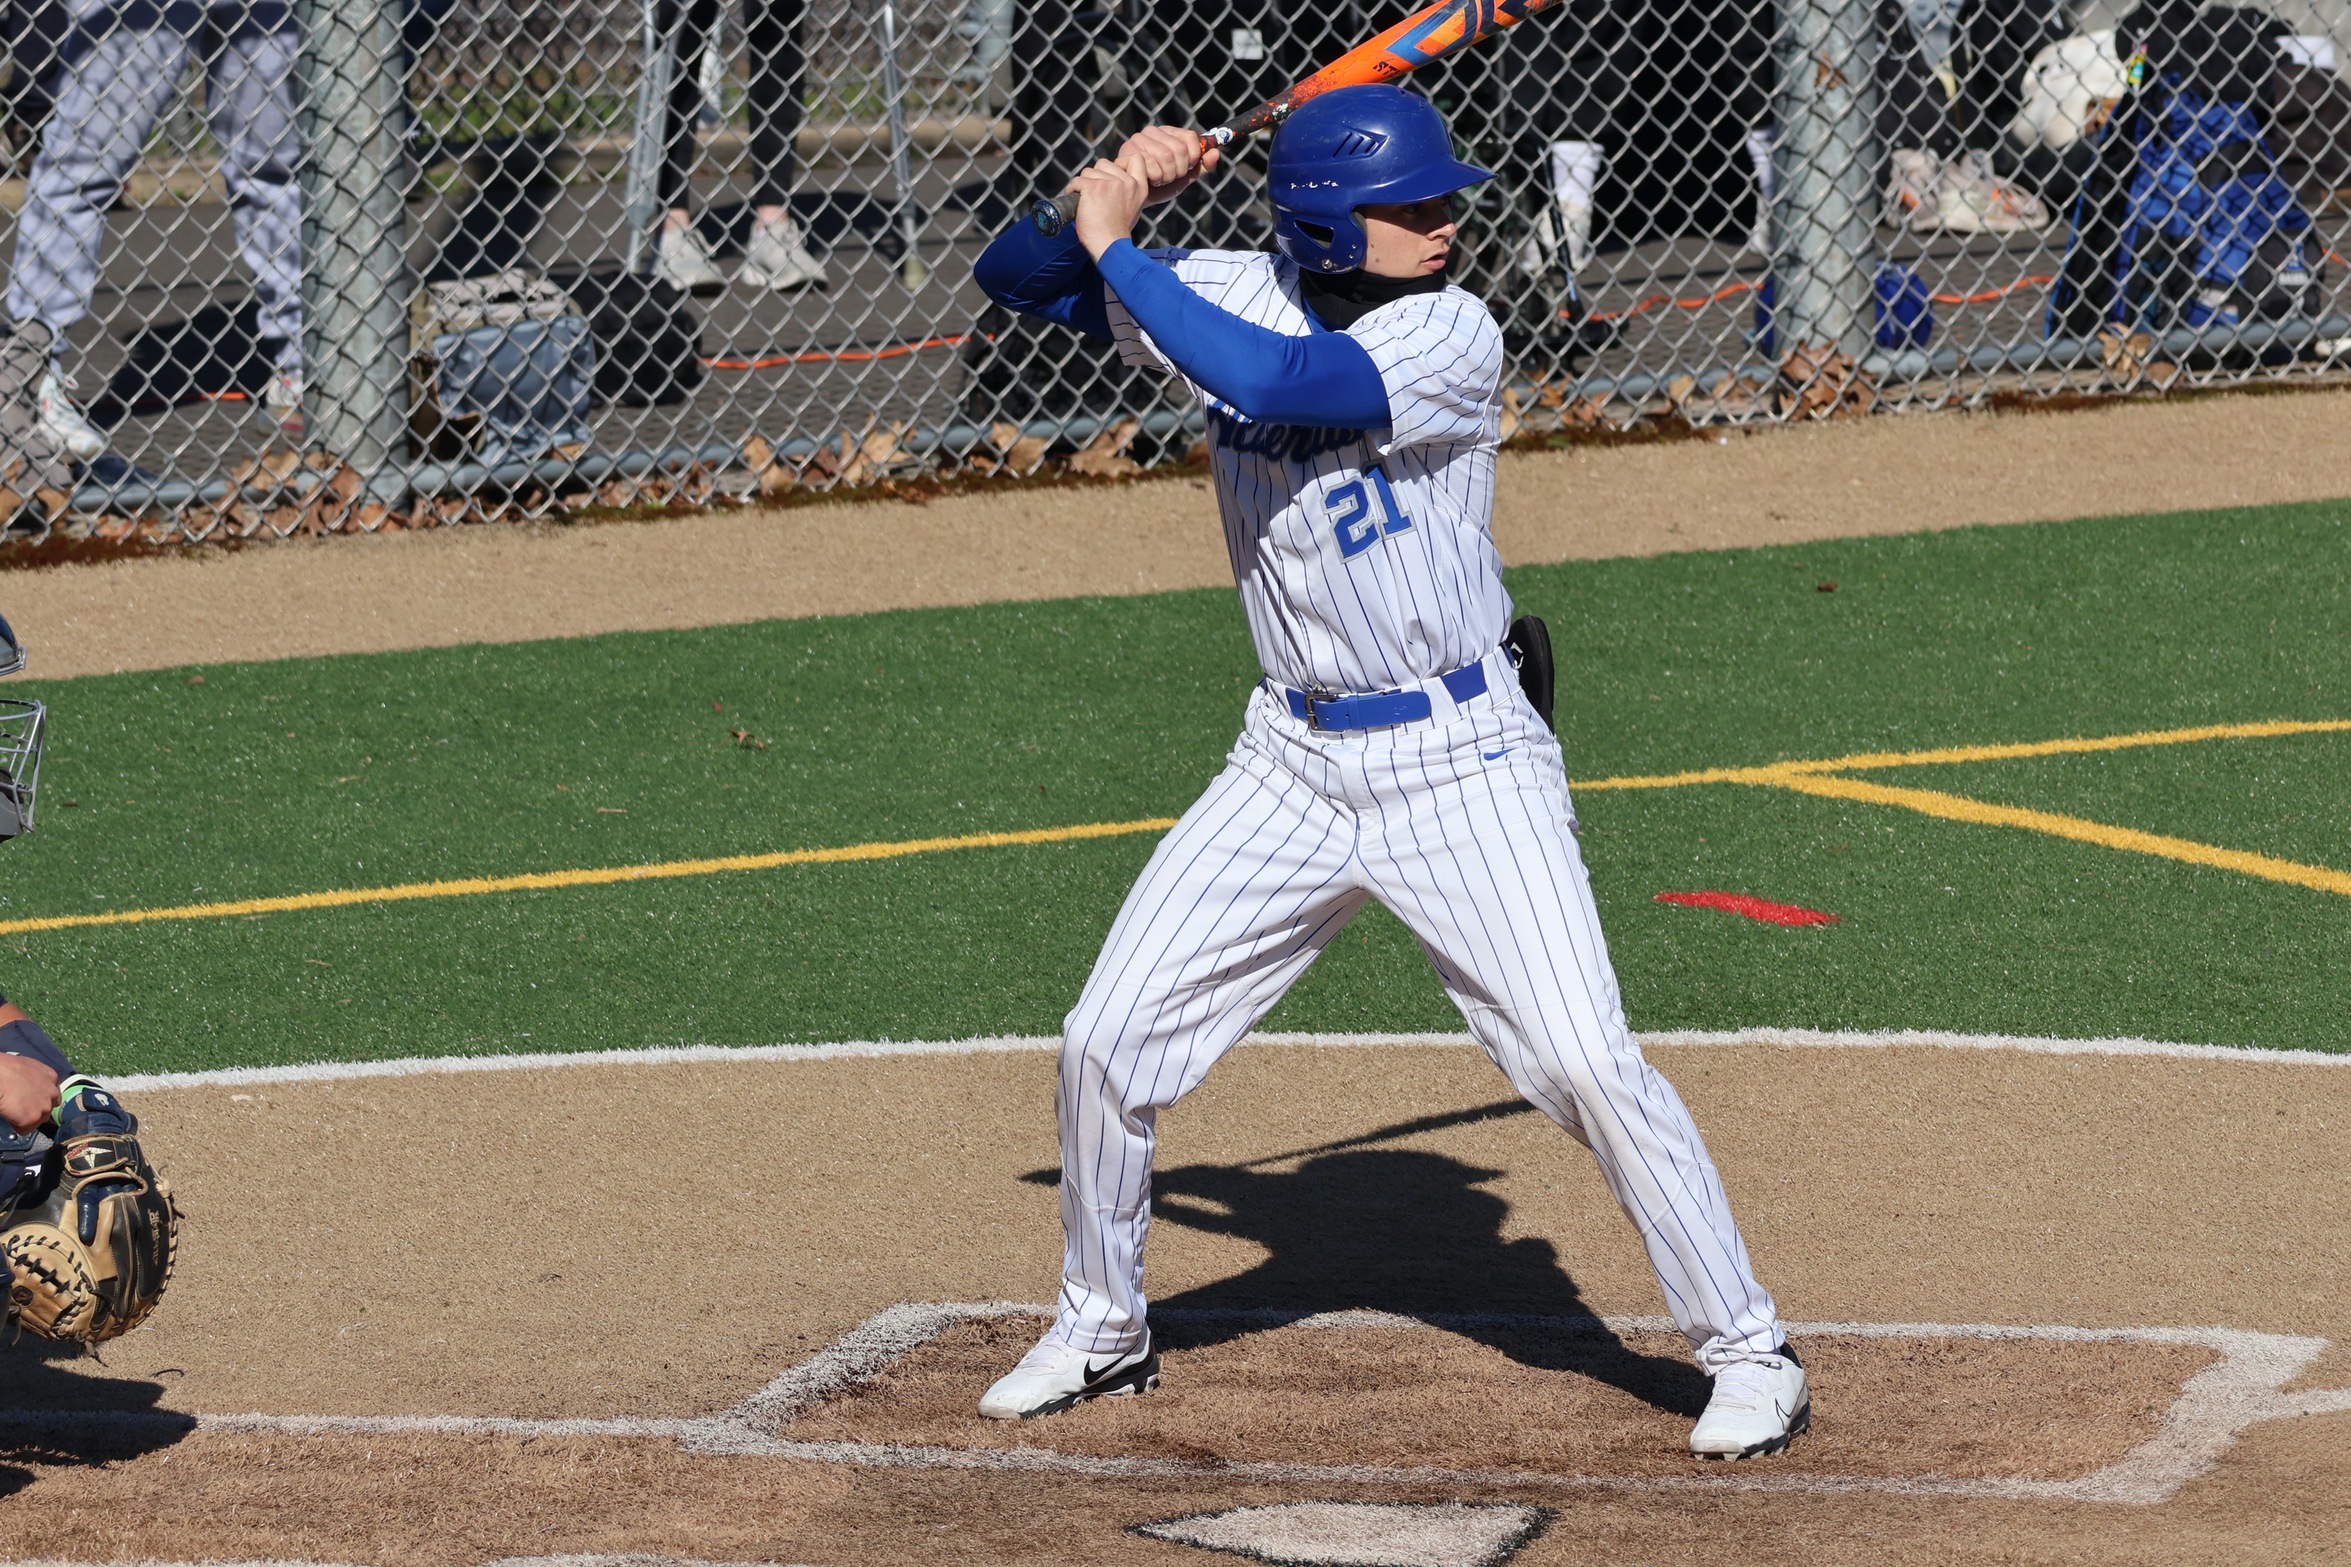 Falcons Total 21 Runs in Doubleheader Sweep at WestConn